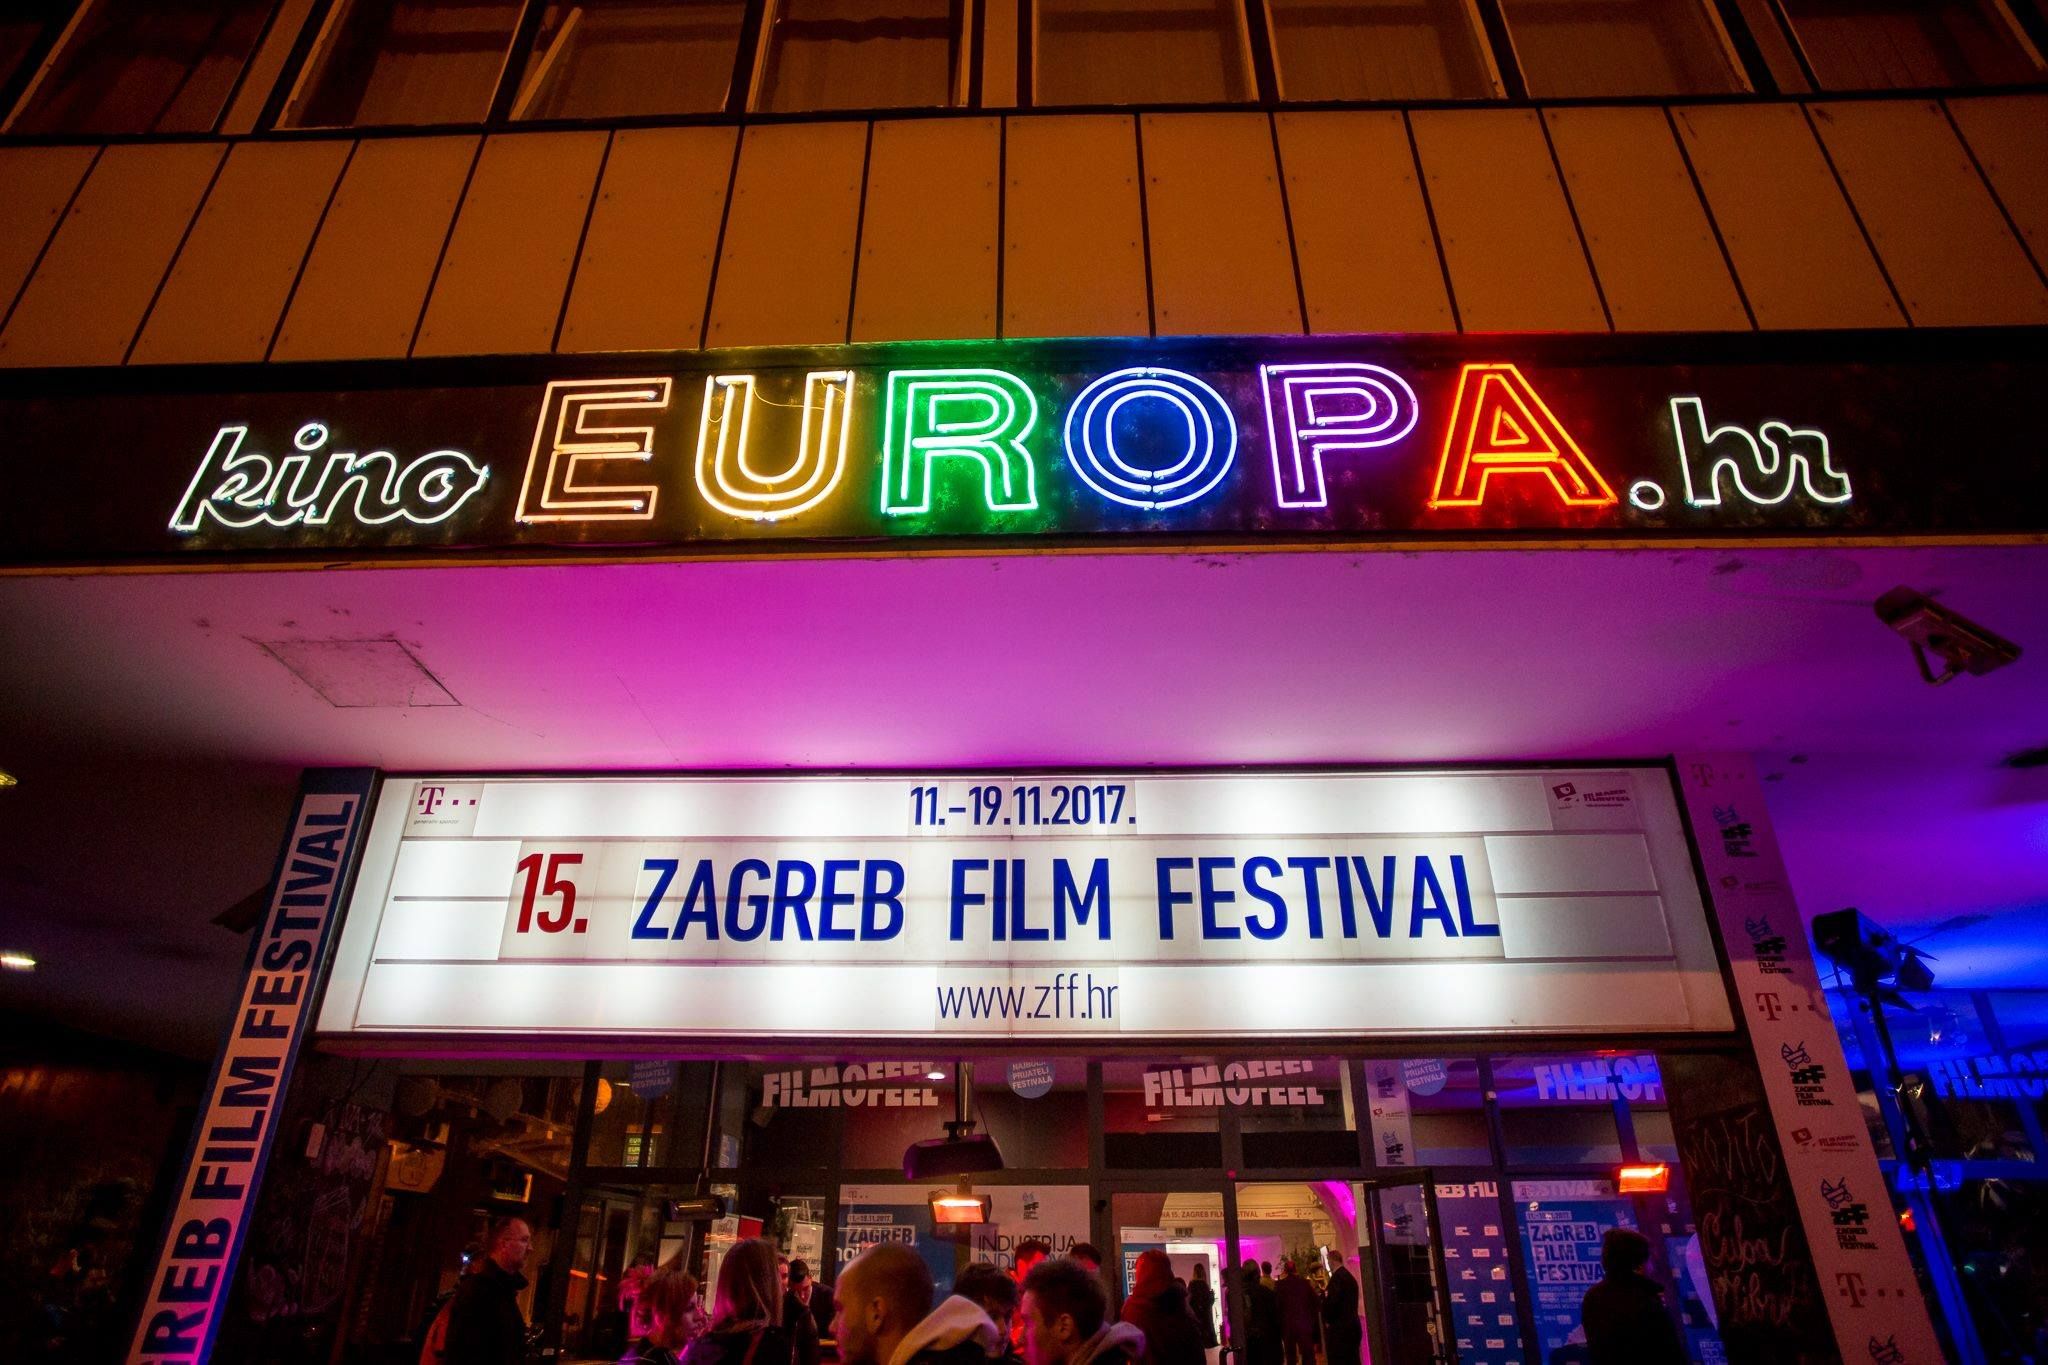 Zagreb Film Festival opens on Sunday in the capital.